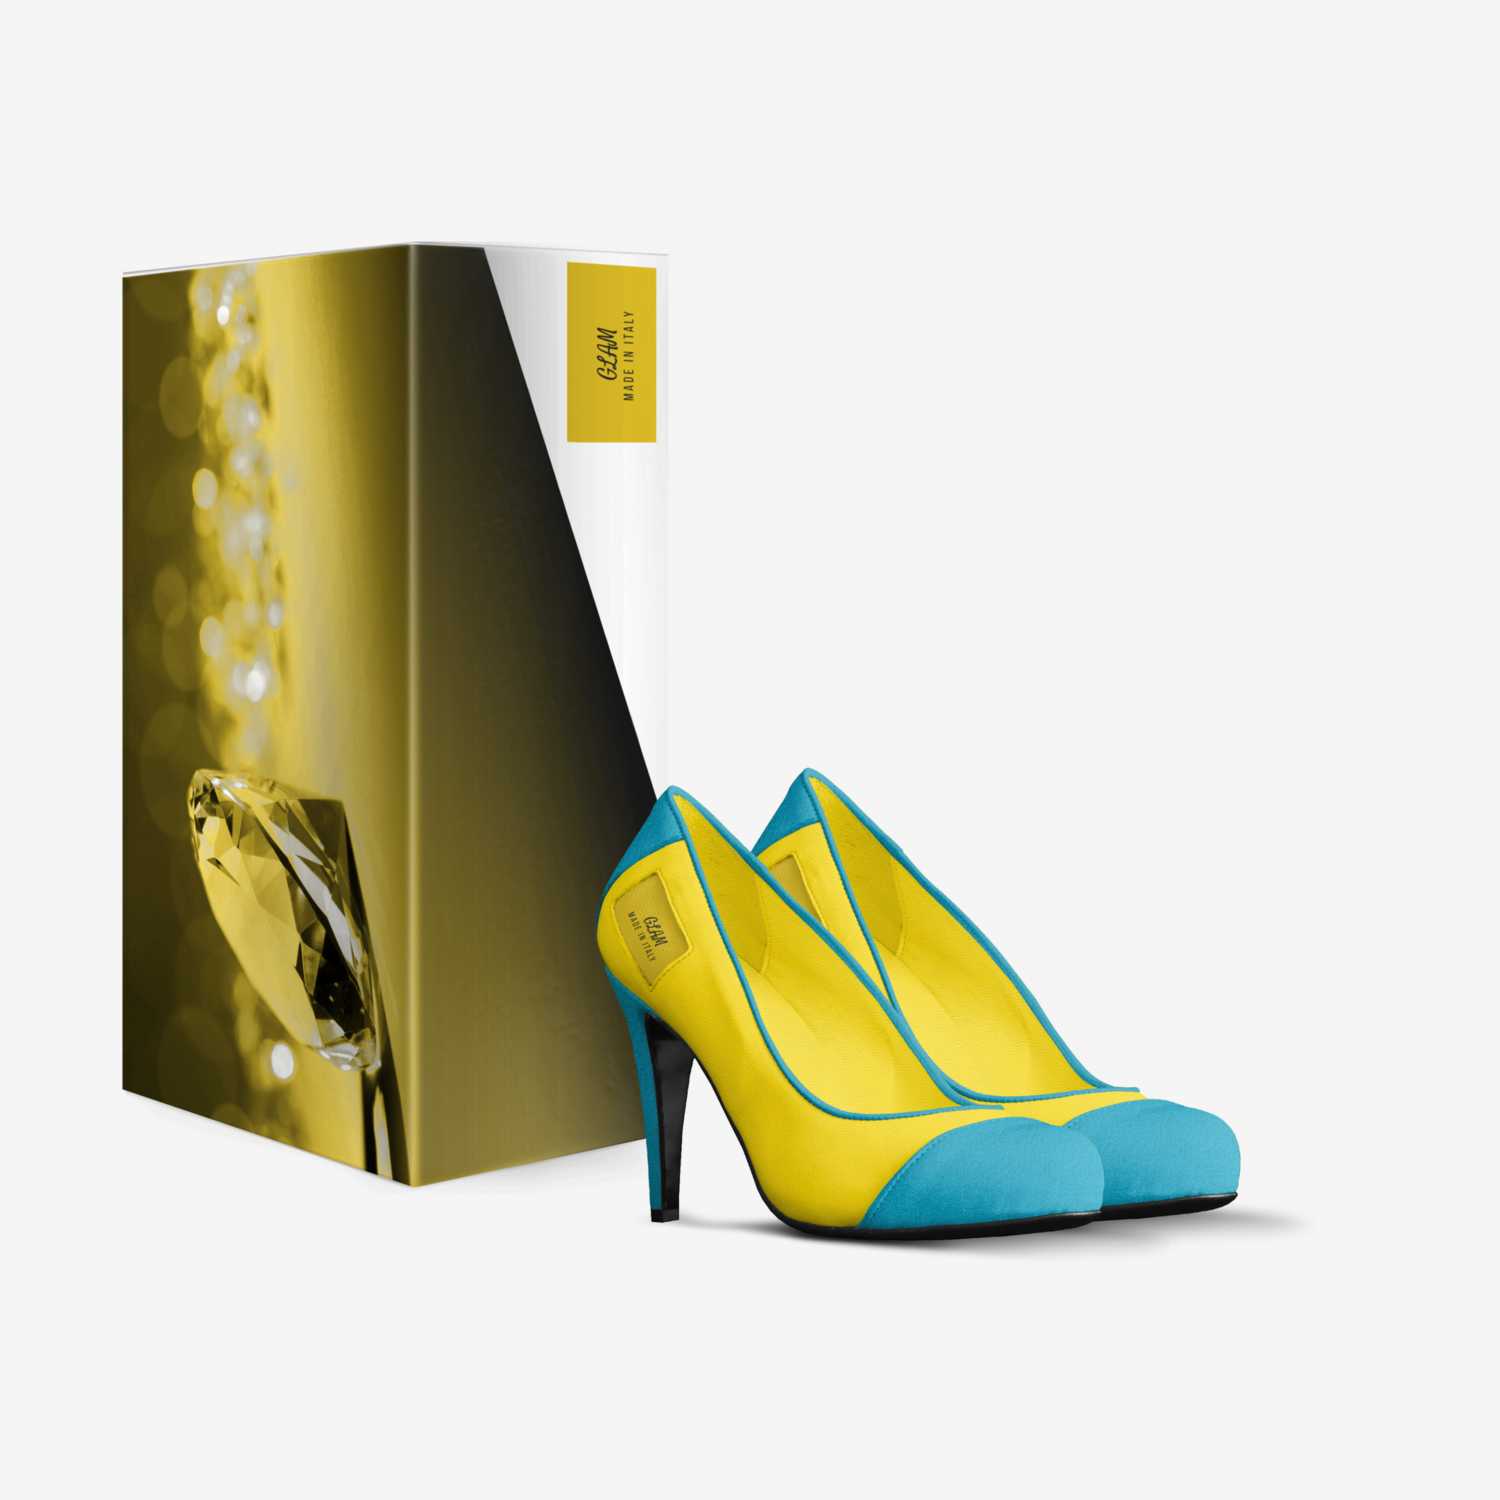 GLAM custom made in Italy shoes by Ayesha Hassaum | Box view